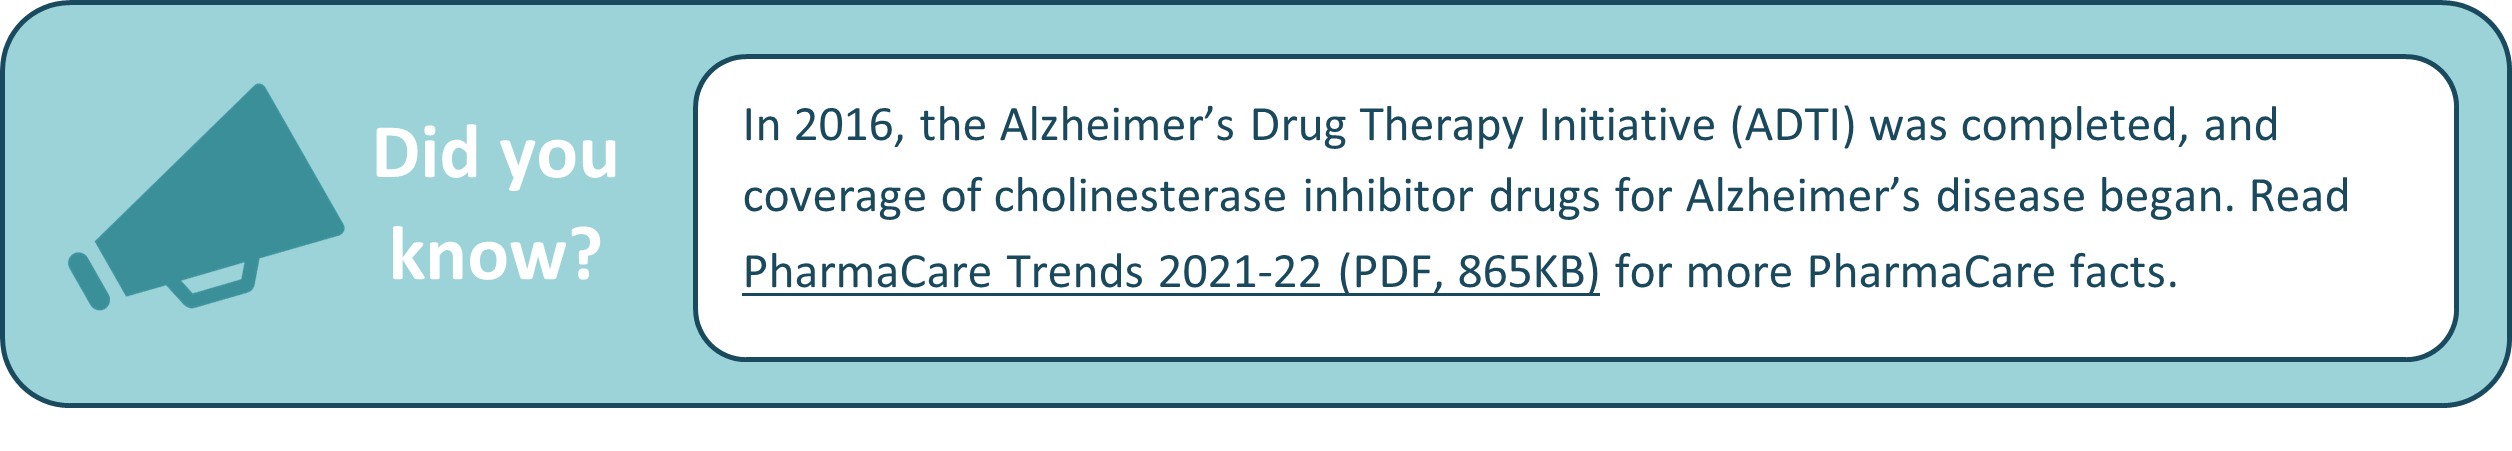 In 2016, the Alzheimer’s Drug Therapy Initiative (ADTI) was completed, and coverage of cholinesterase inhibitor drugs for Alzheimer’s disease began. Read PharmaCare Trends 2021-22 (PDF, 865KB) for more PharmaCare facts.